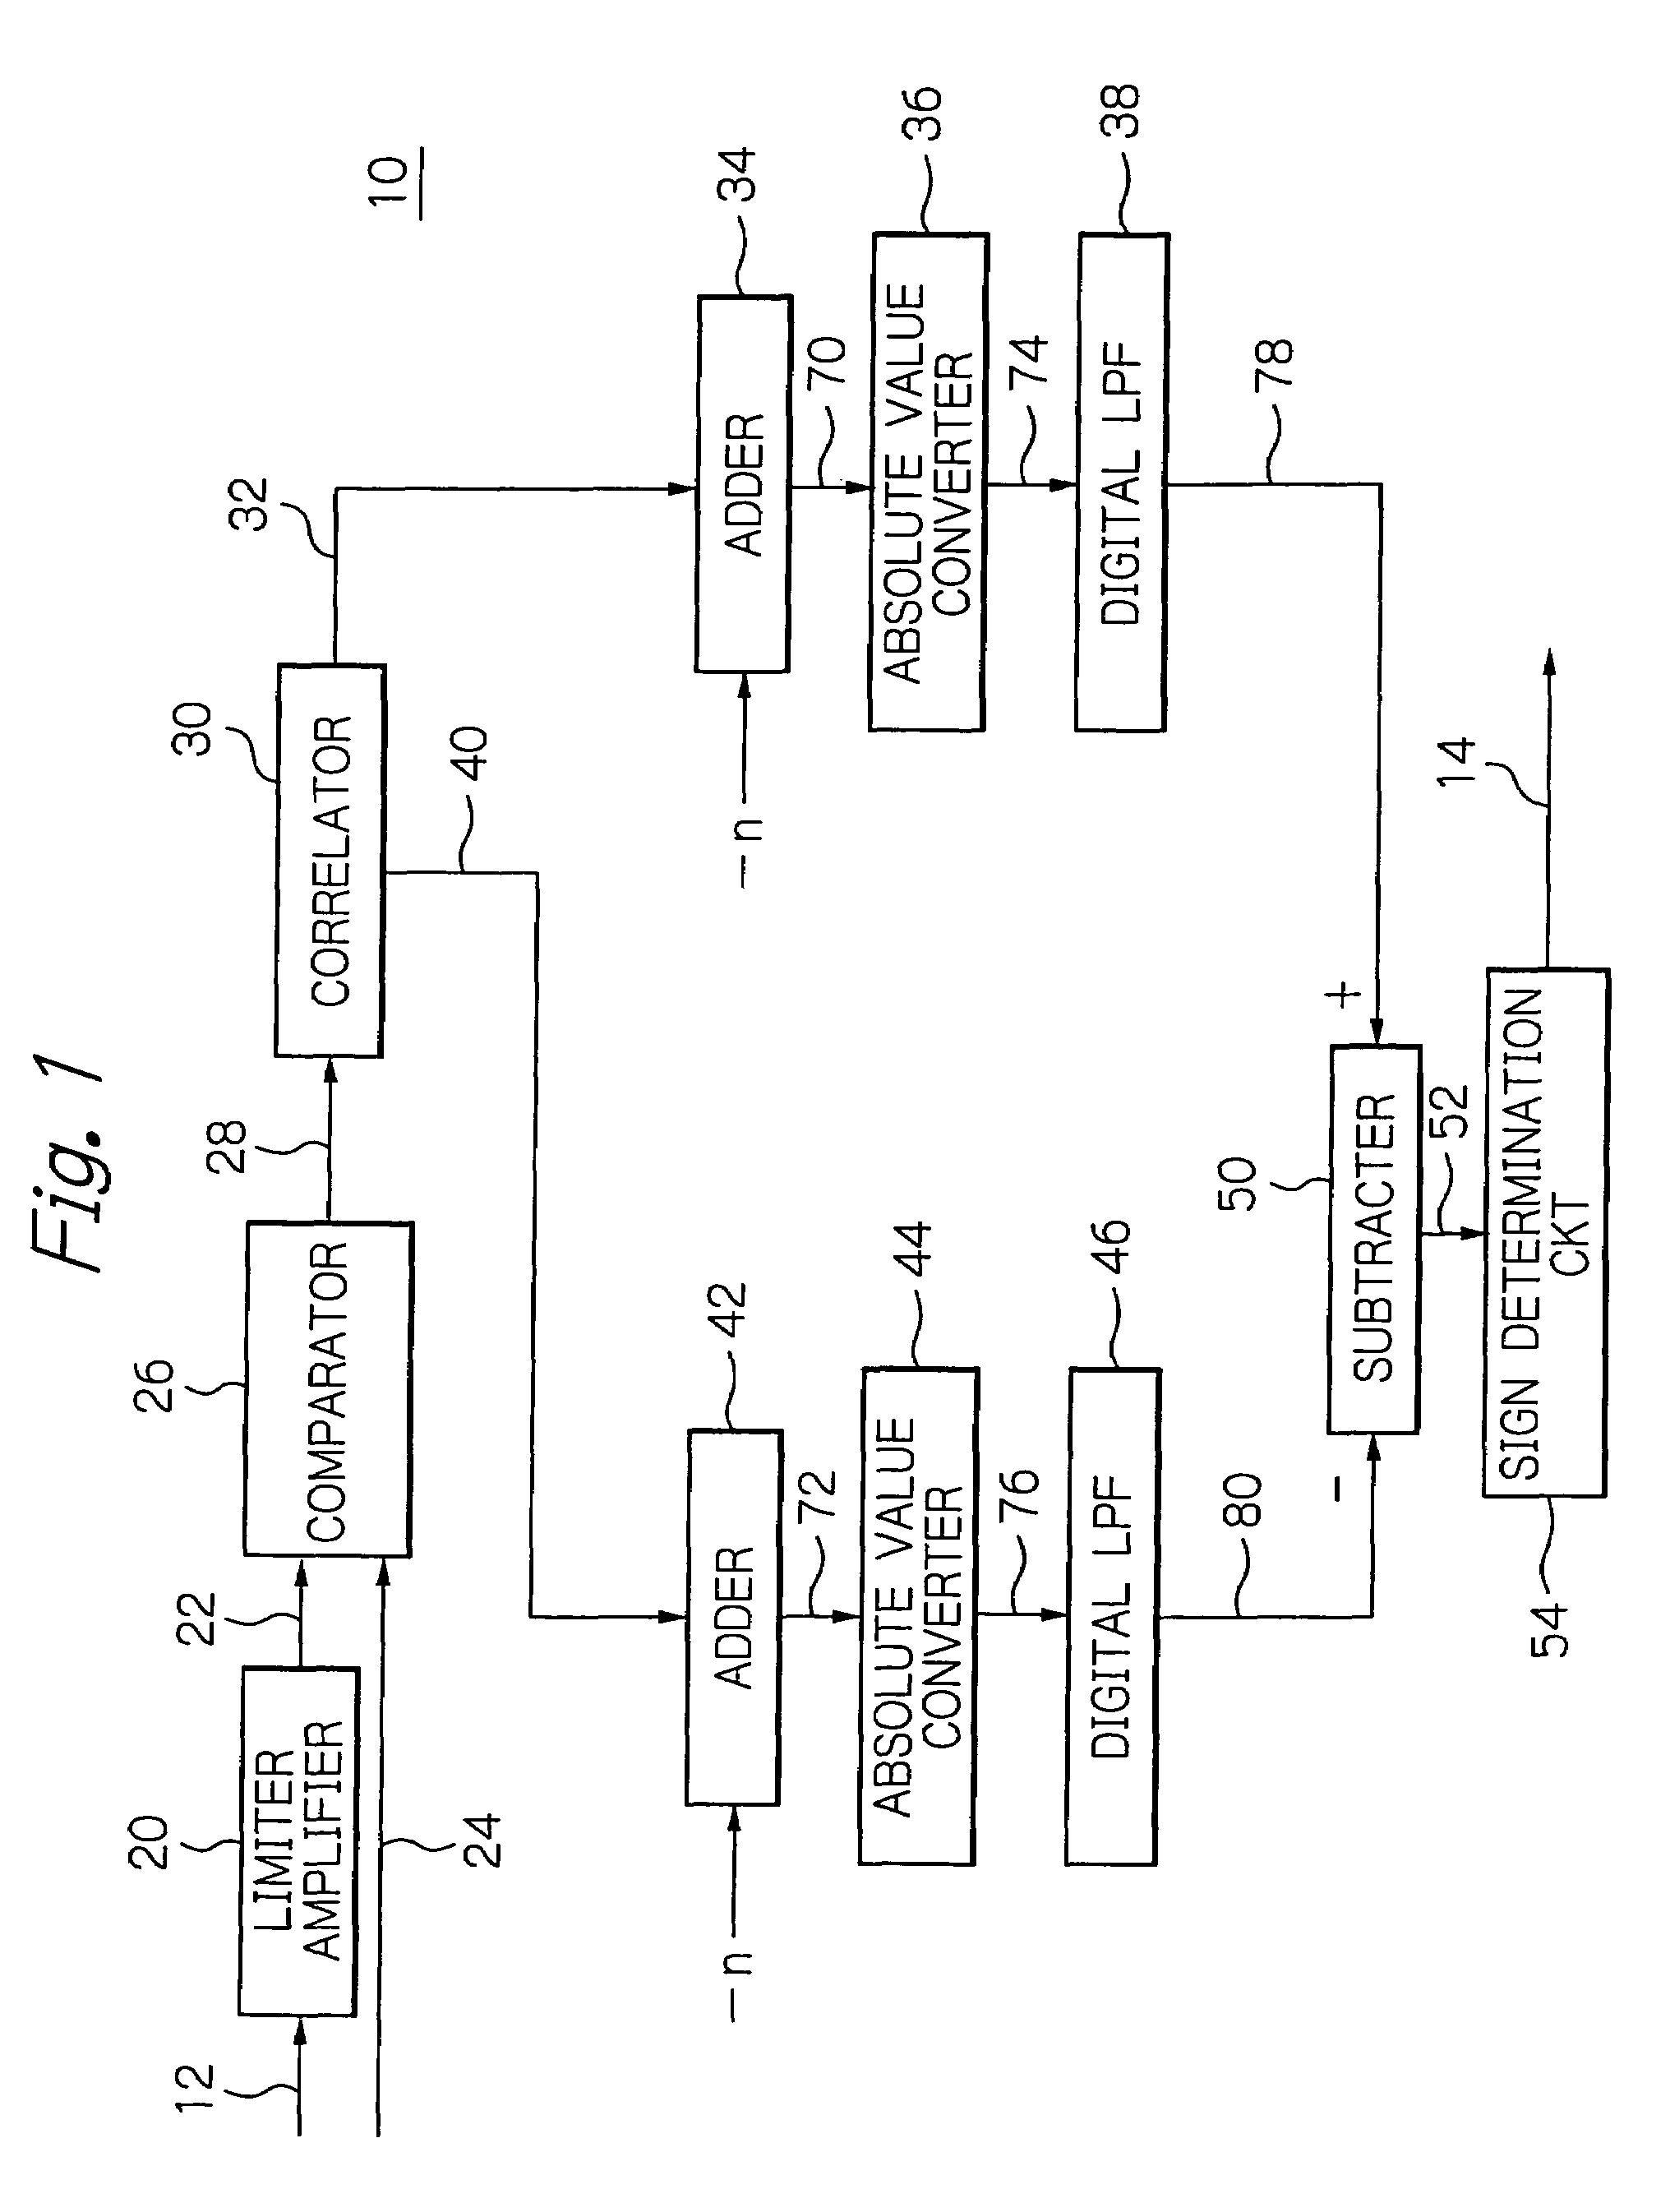 Detector for detecting a frequency-shift keying signal by digital processing